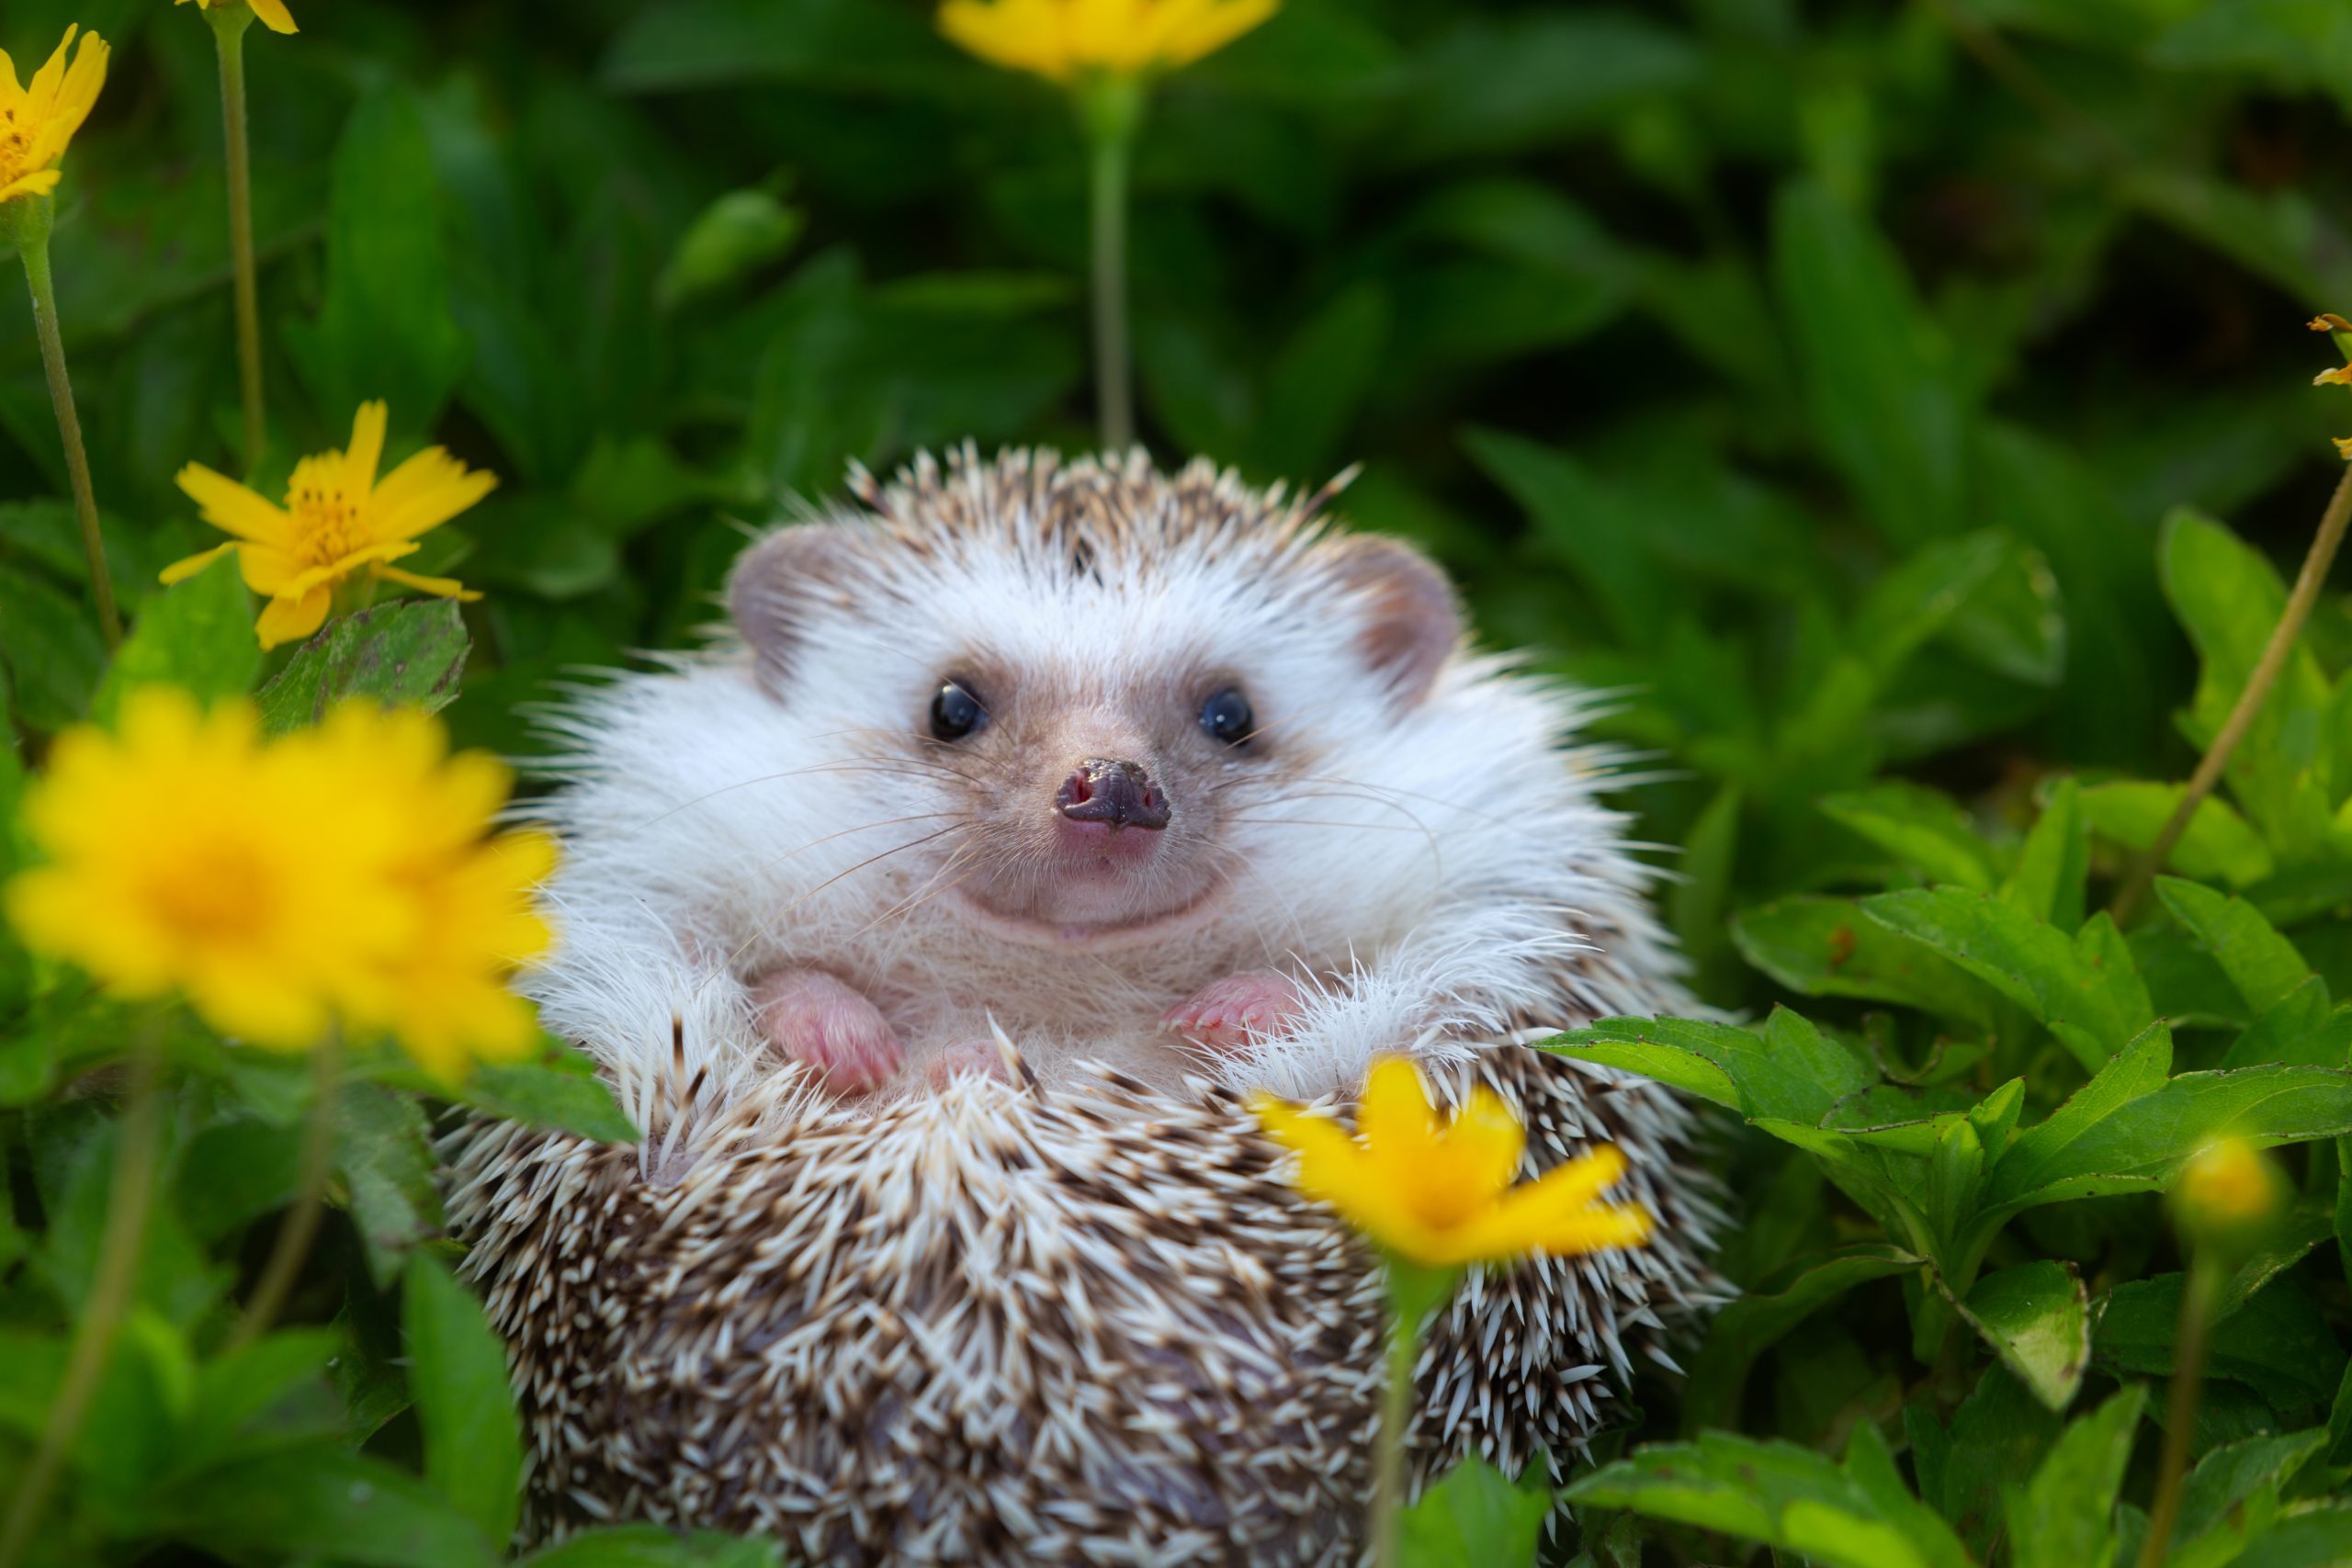 European Hedgehog playing at the flower garden, very pretty face and two front paws.